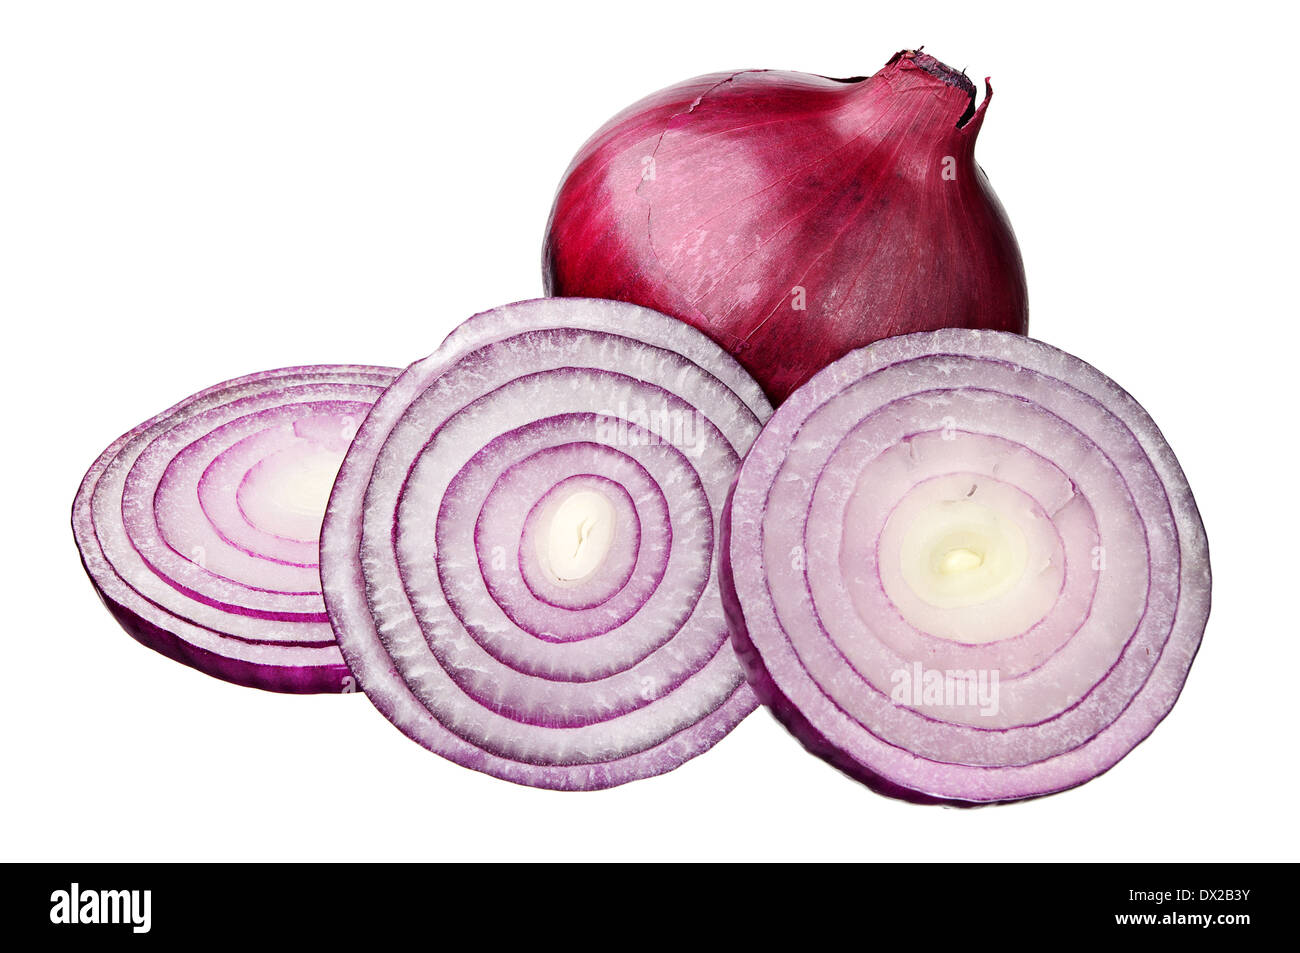 Red onion sliced isolated on white Stock Photo